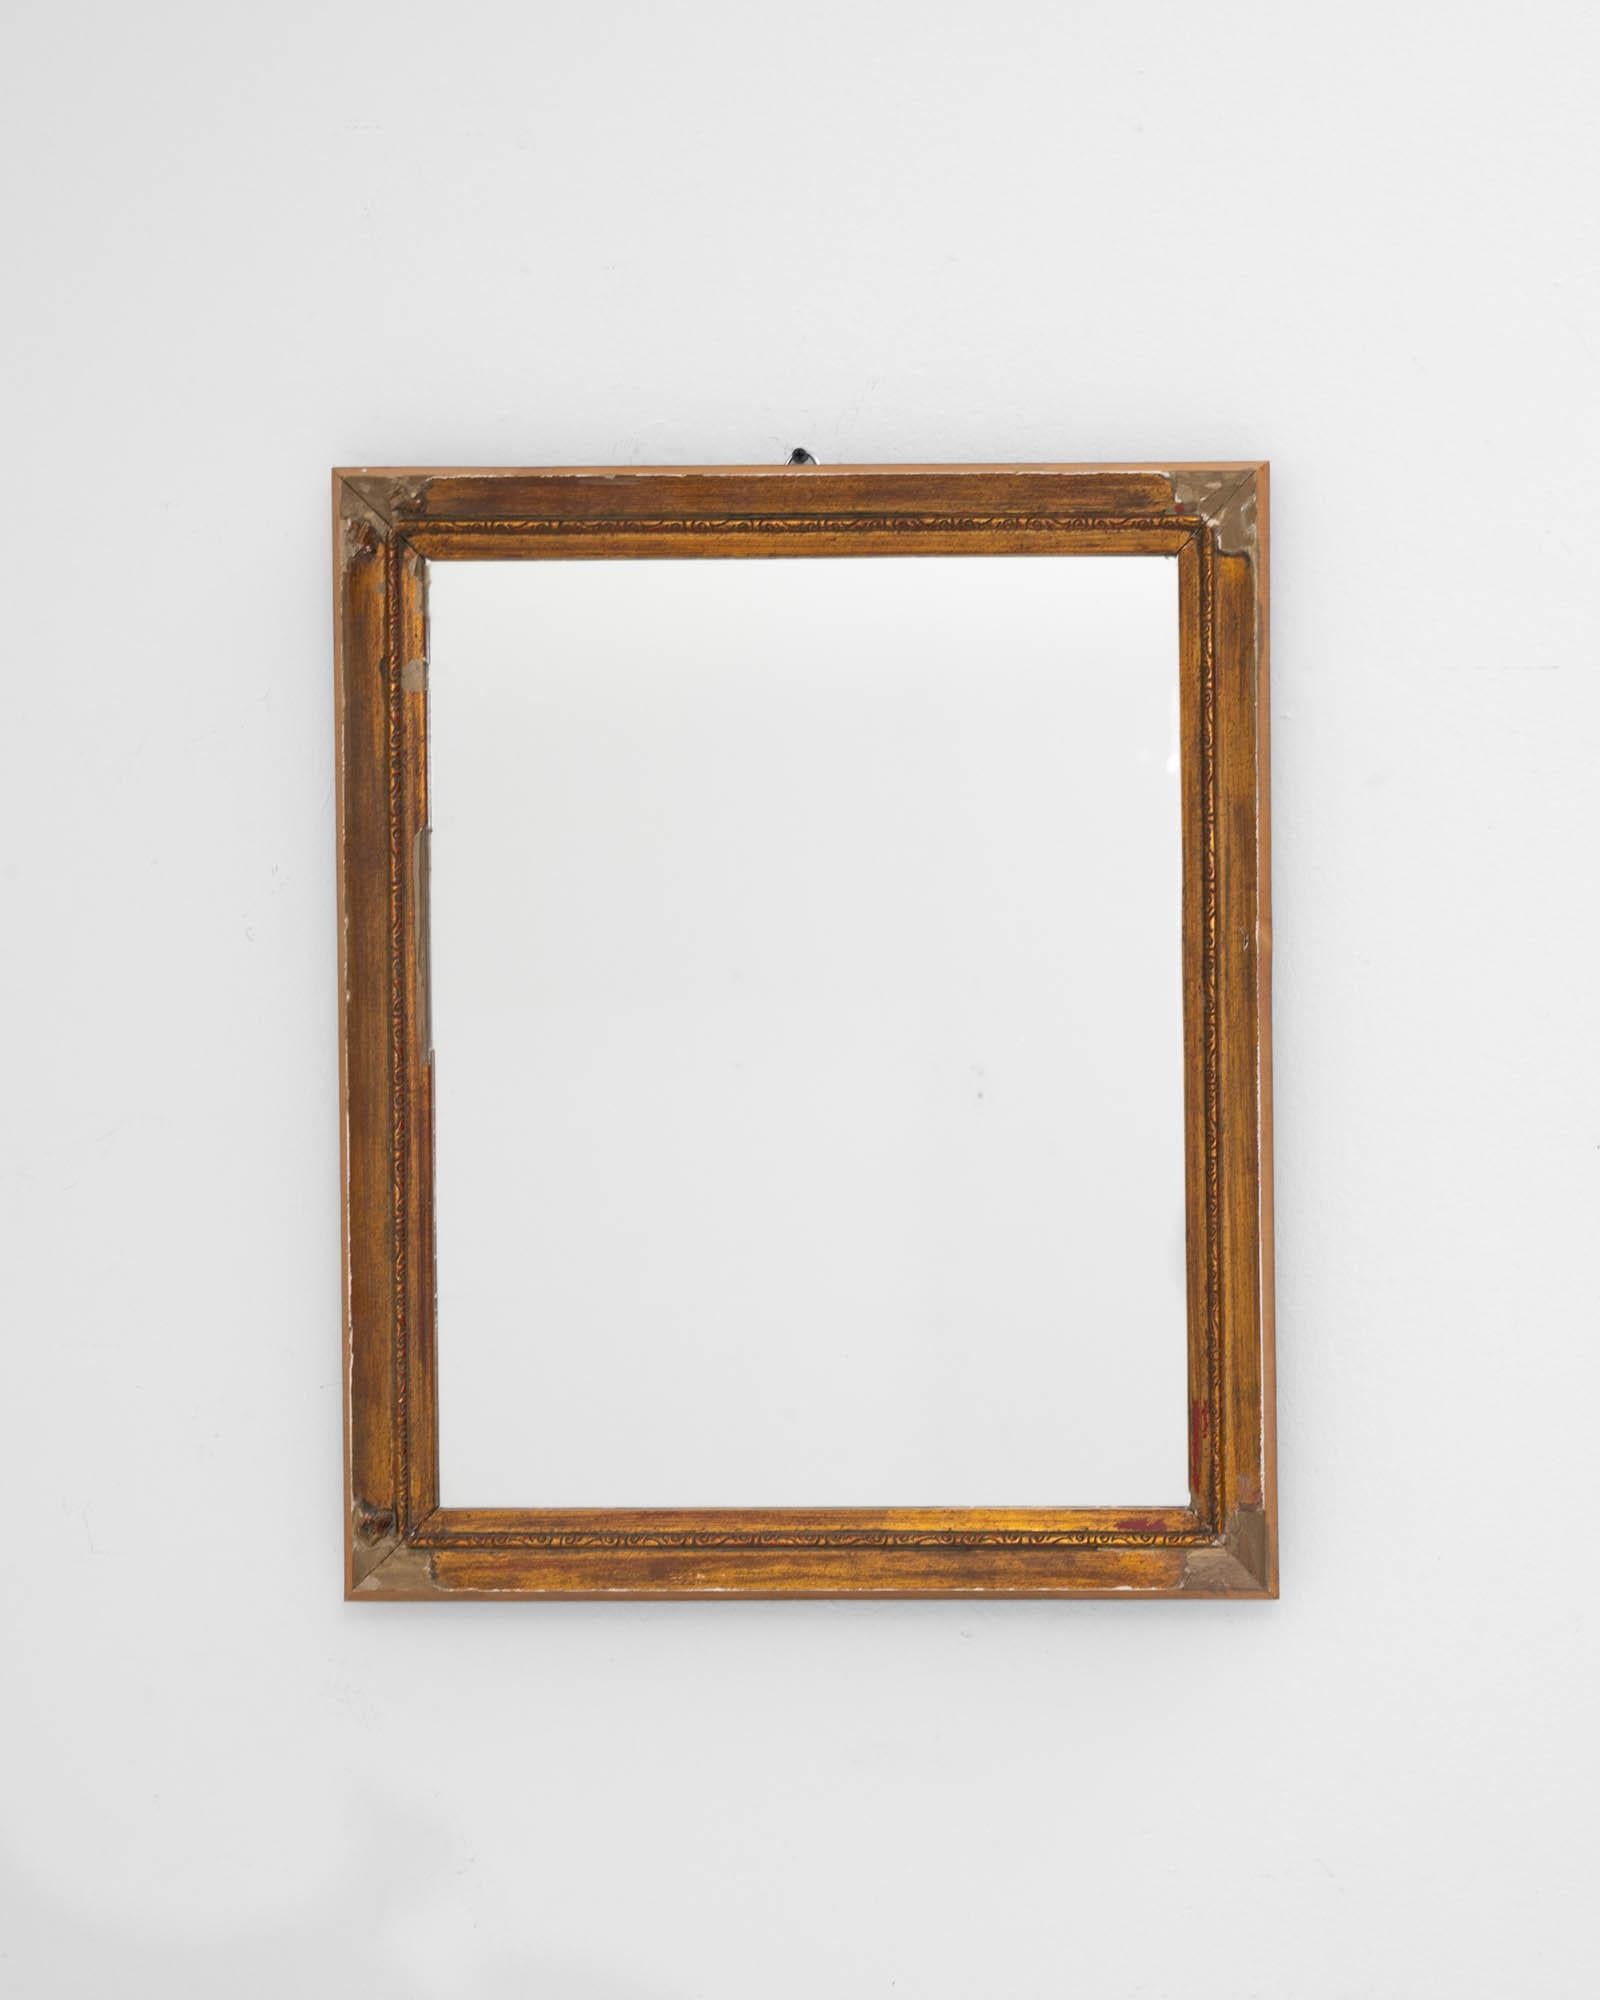 A wooden gilded mirror created in 19th century France. With rustic yet elegant patterned wood and an attractively shaped frame, this mid-sized mirror offers a refined composition for reflection. The time-touched frame, mesmerizingly adorned with